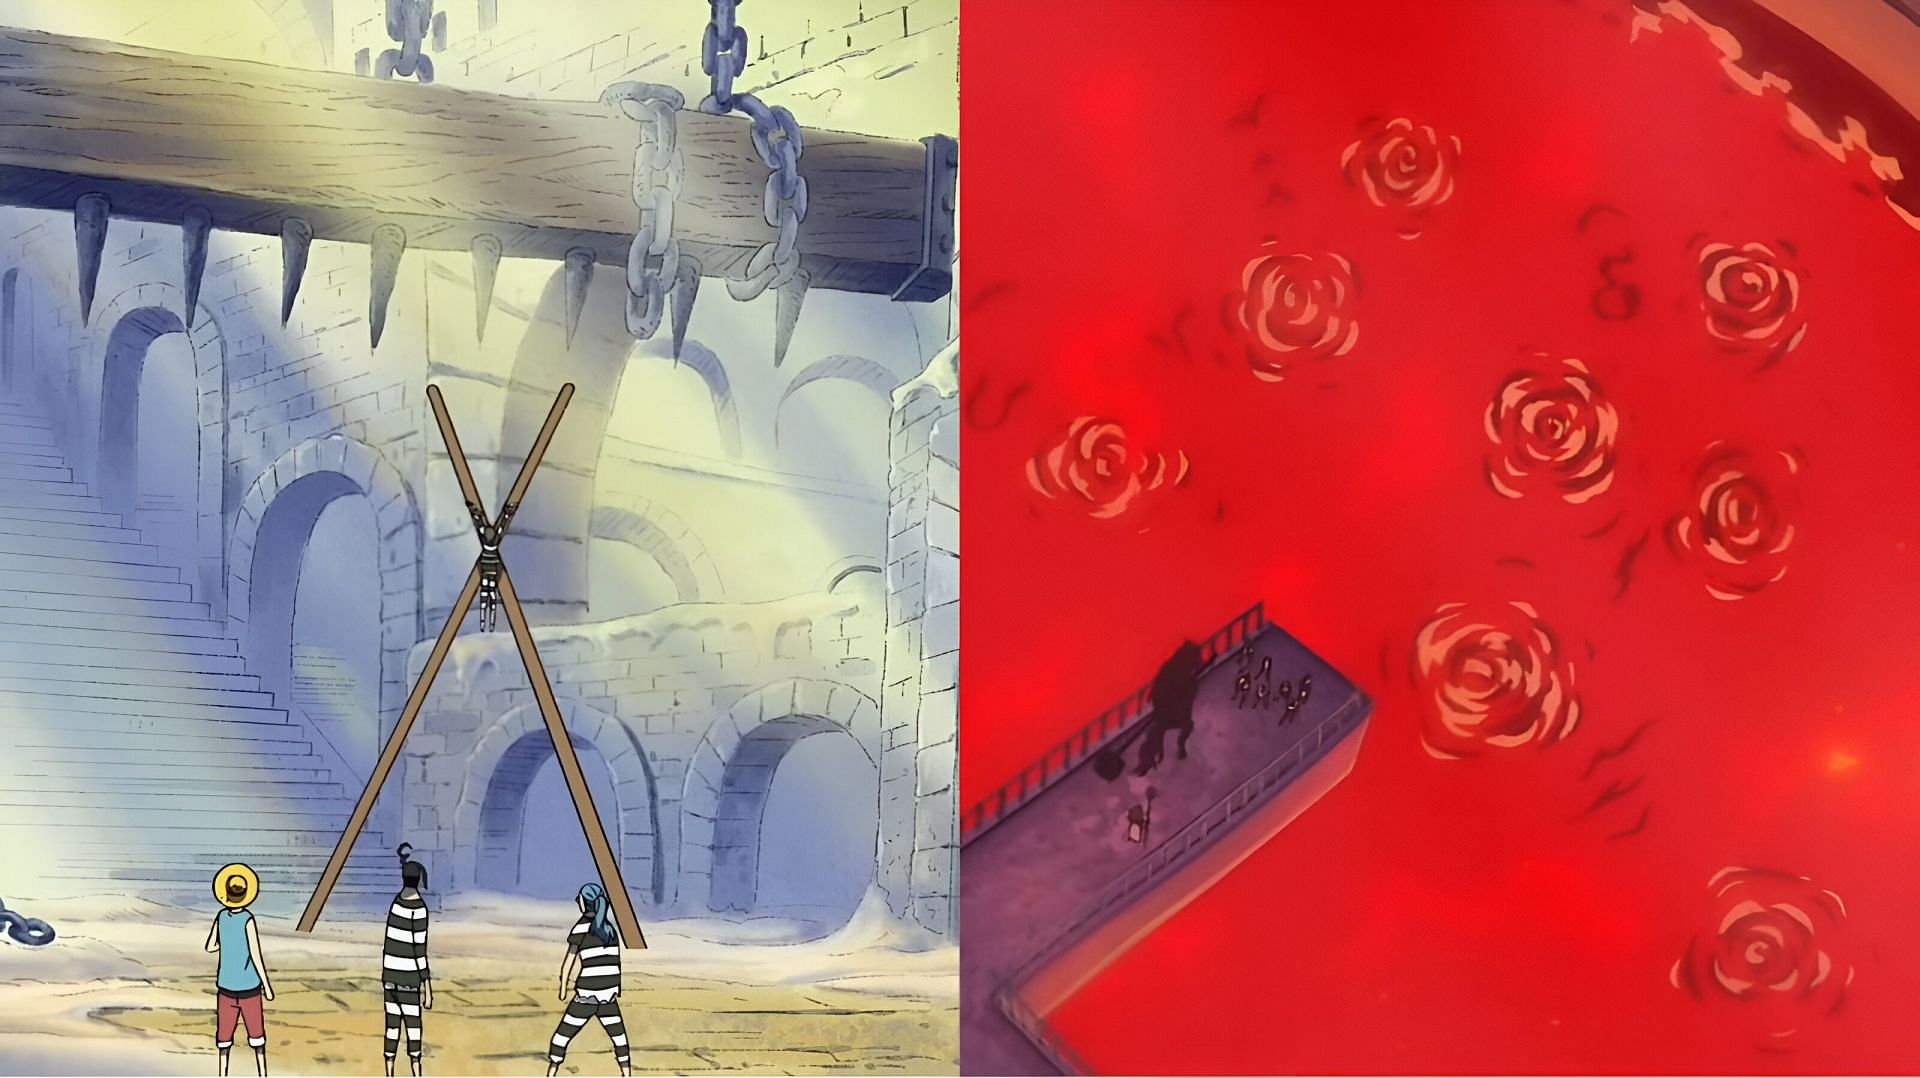 Level 3 (left) and level 4 (right) of Impel Down (Image via Toei Animation)